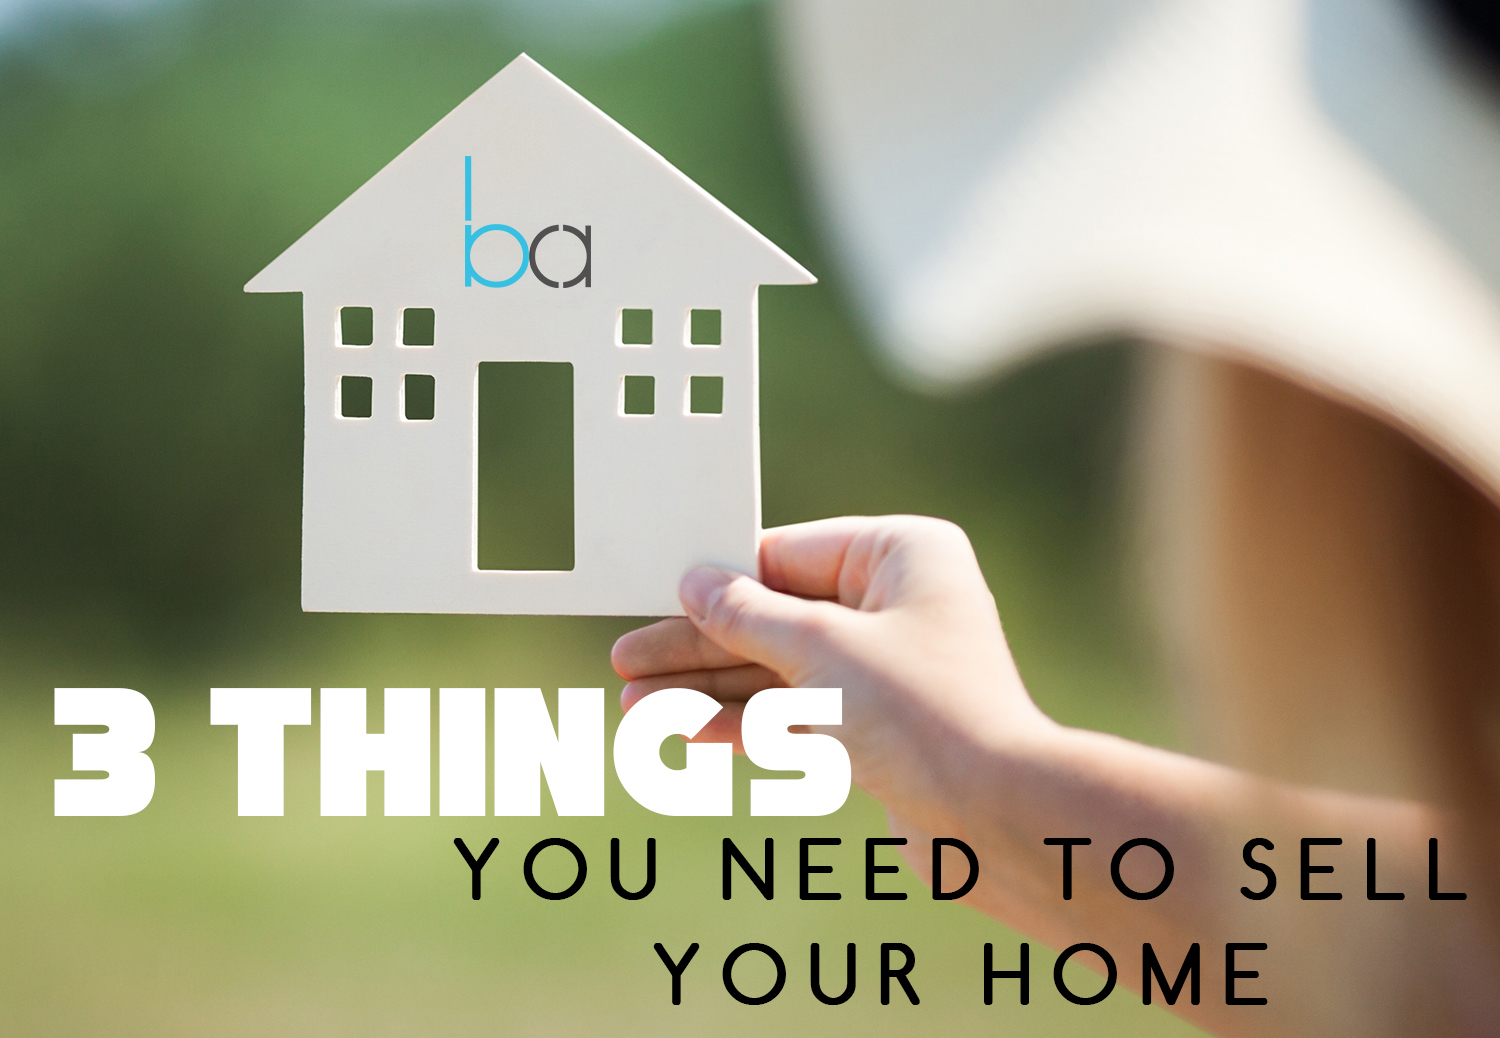 3 THINGS YOU NEED TO SELL YOUR HOME